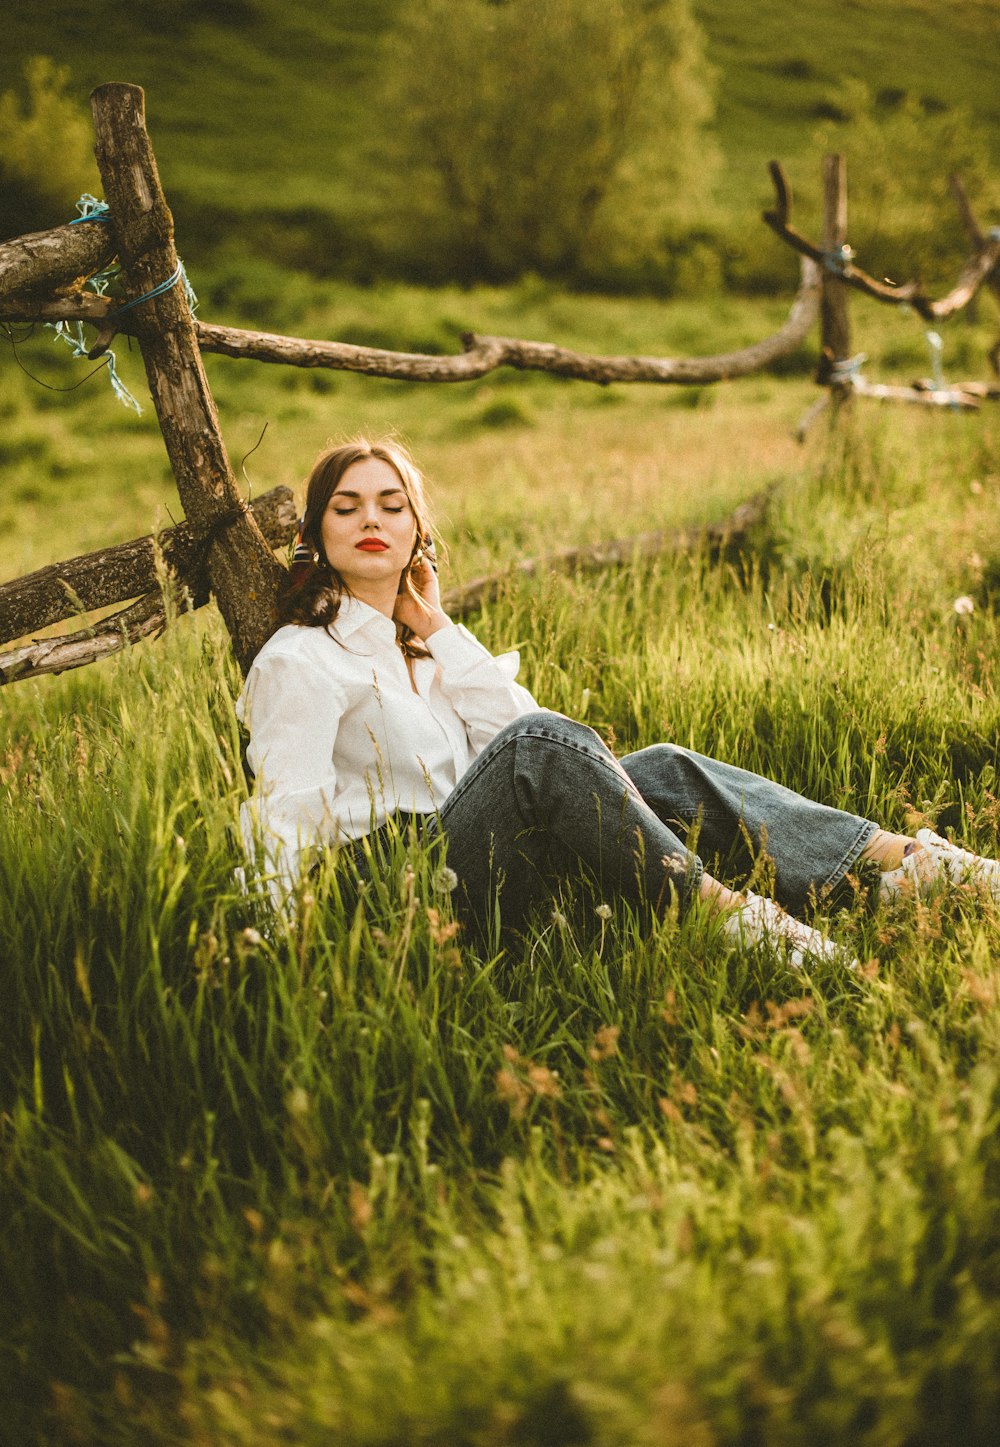 a woman sitting in a field with a fence in the background